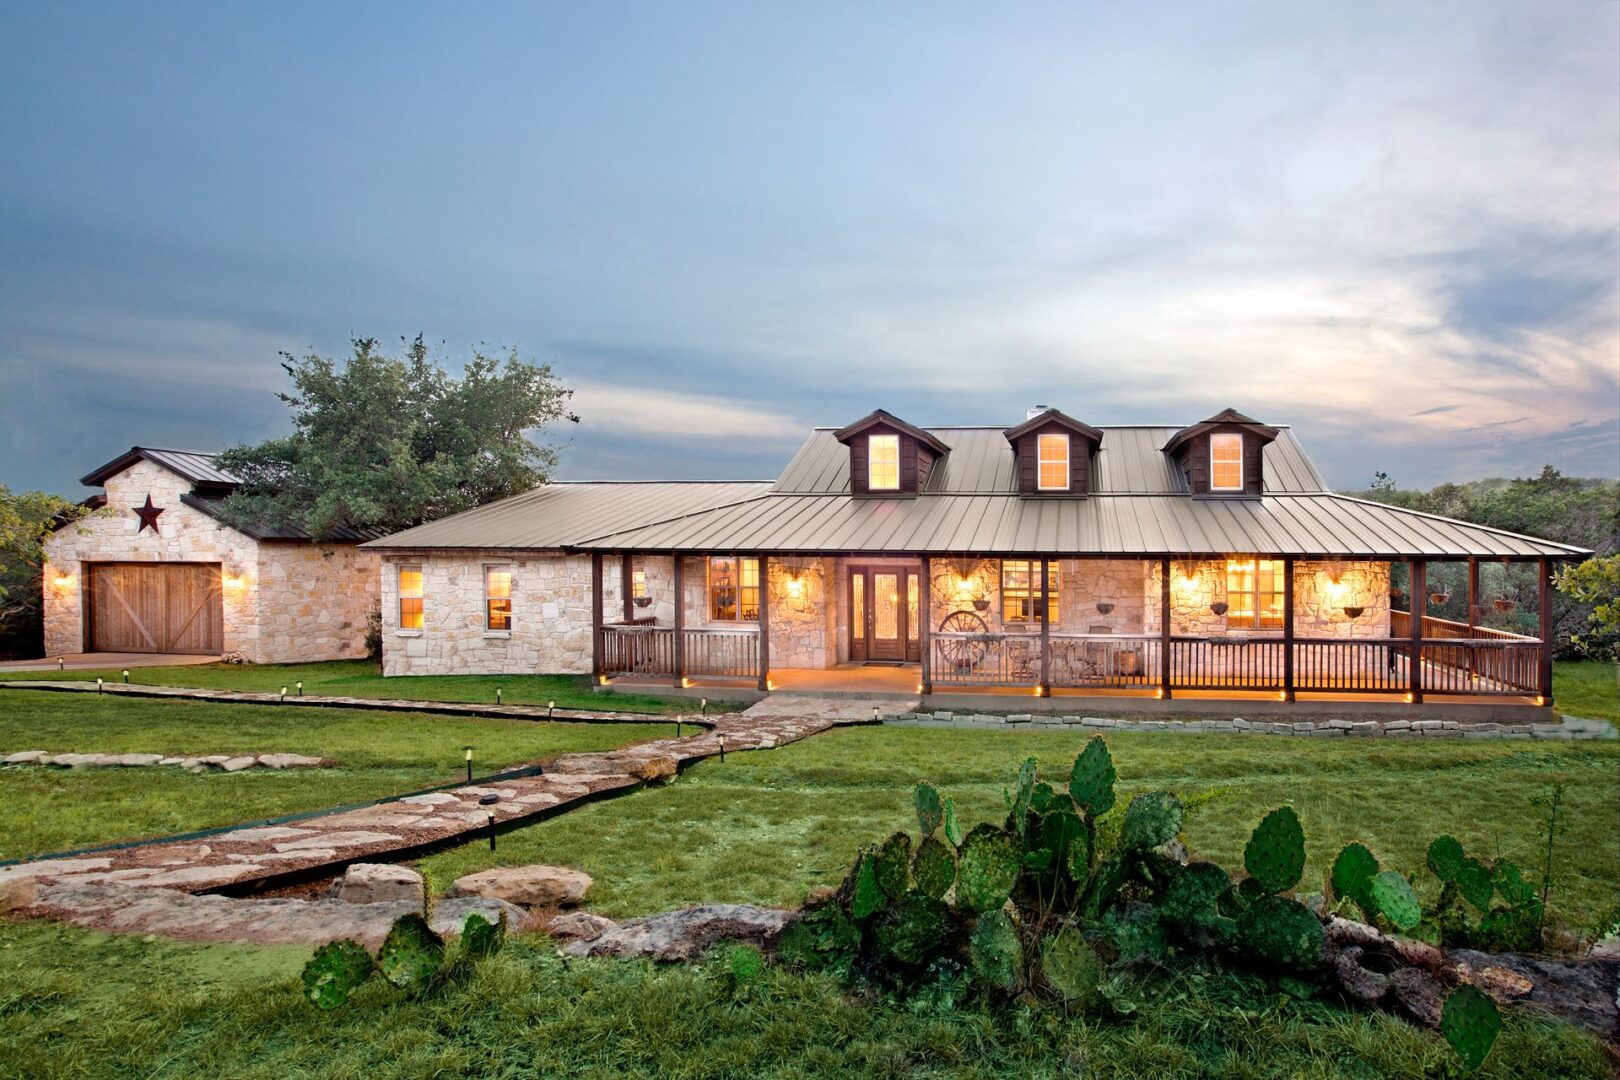 A ranch style home in Austin, Texas with a metal roof.